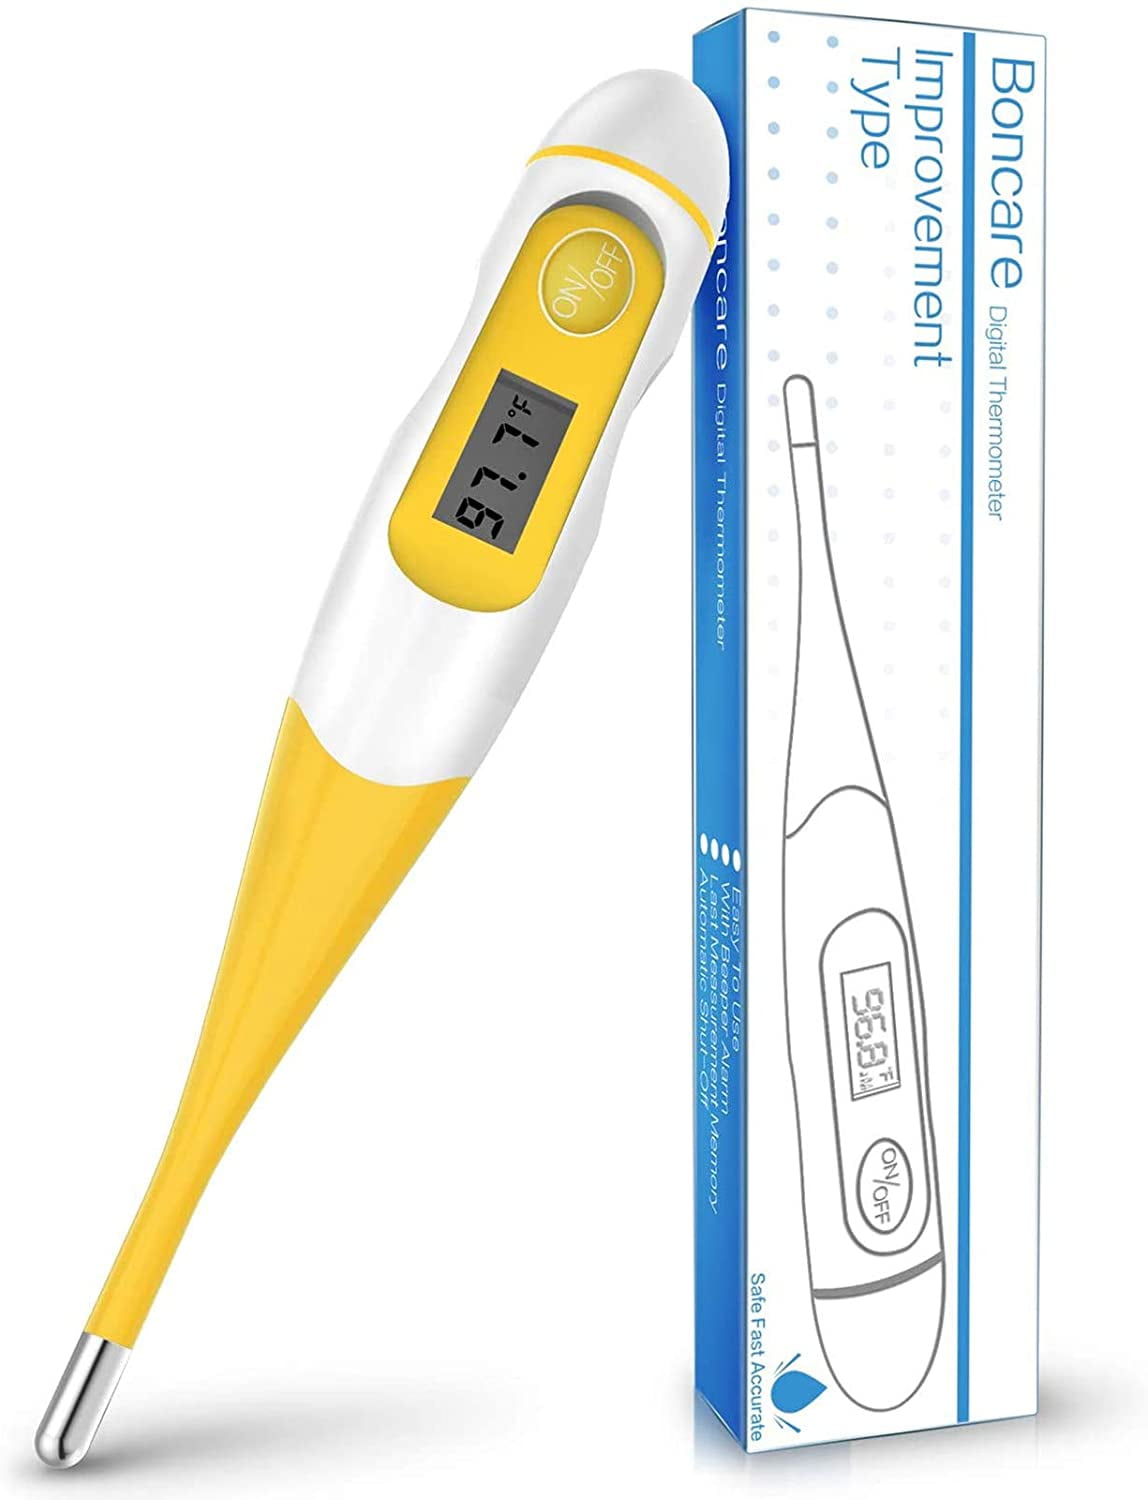 60 Seconds Rigid Tip Digital Thermometer with Auto-off Function - China  Digital Thermometer, Thermometer for Adults